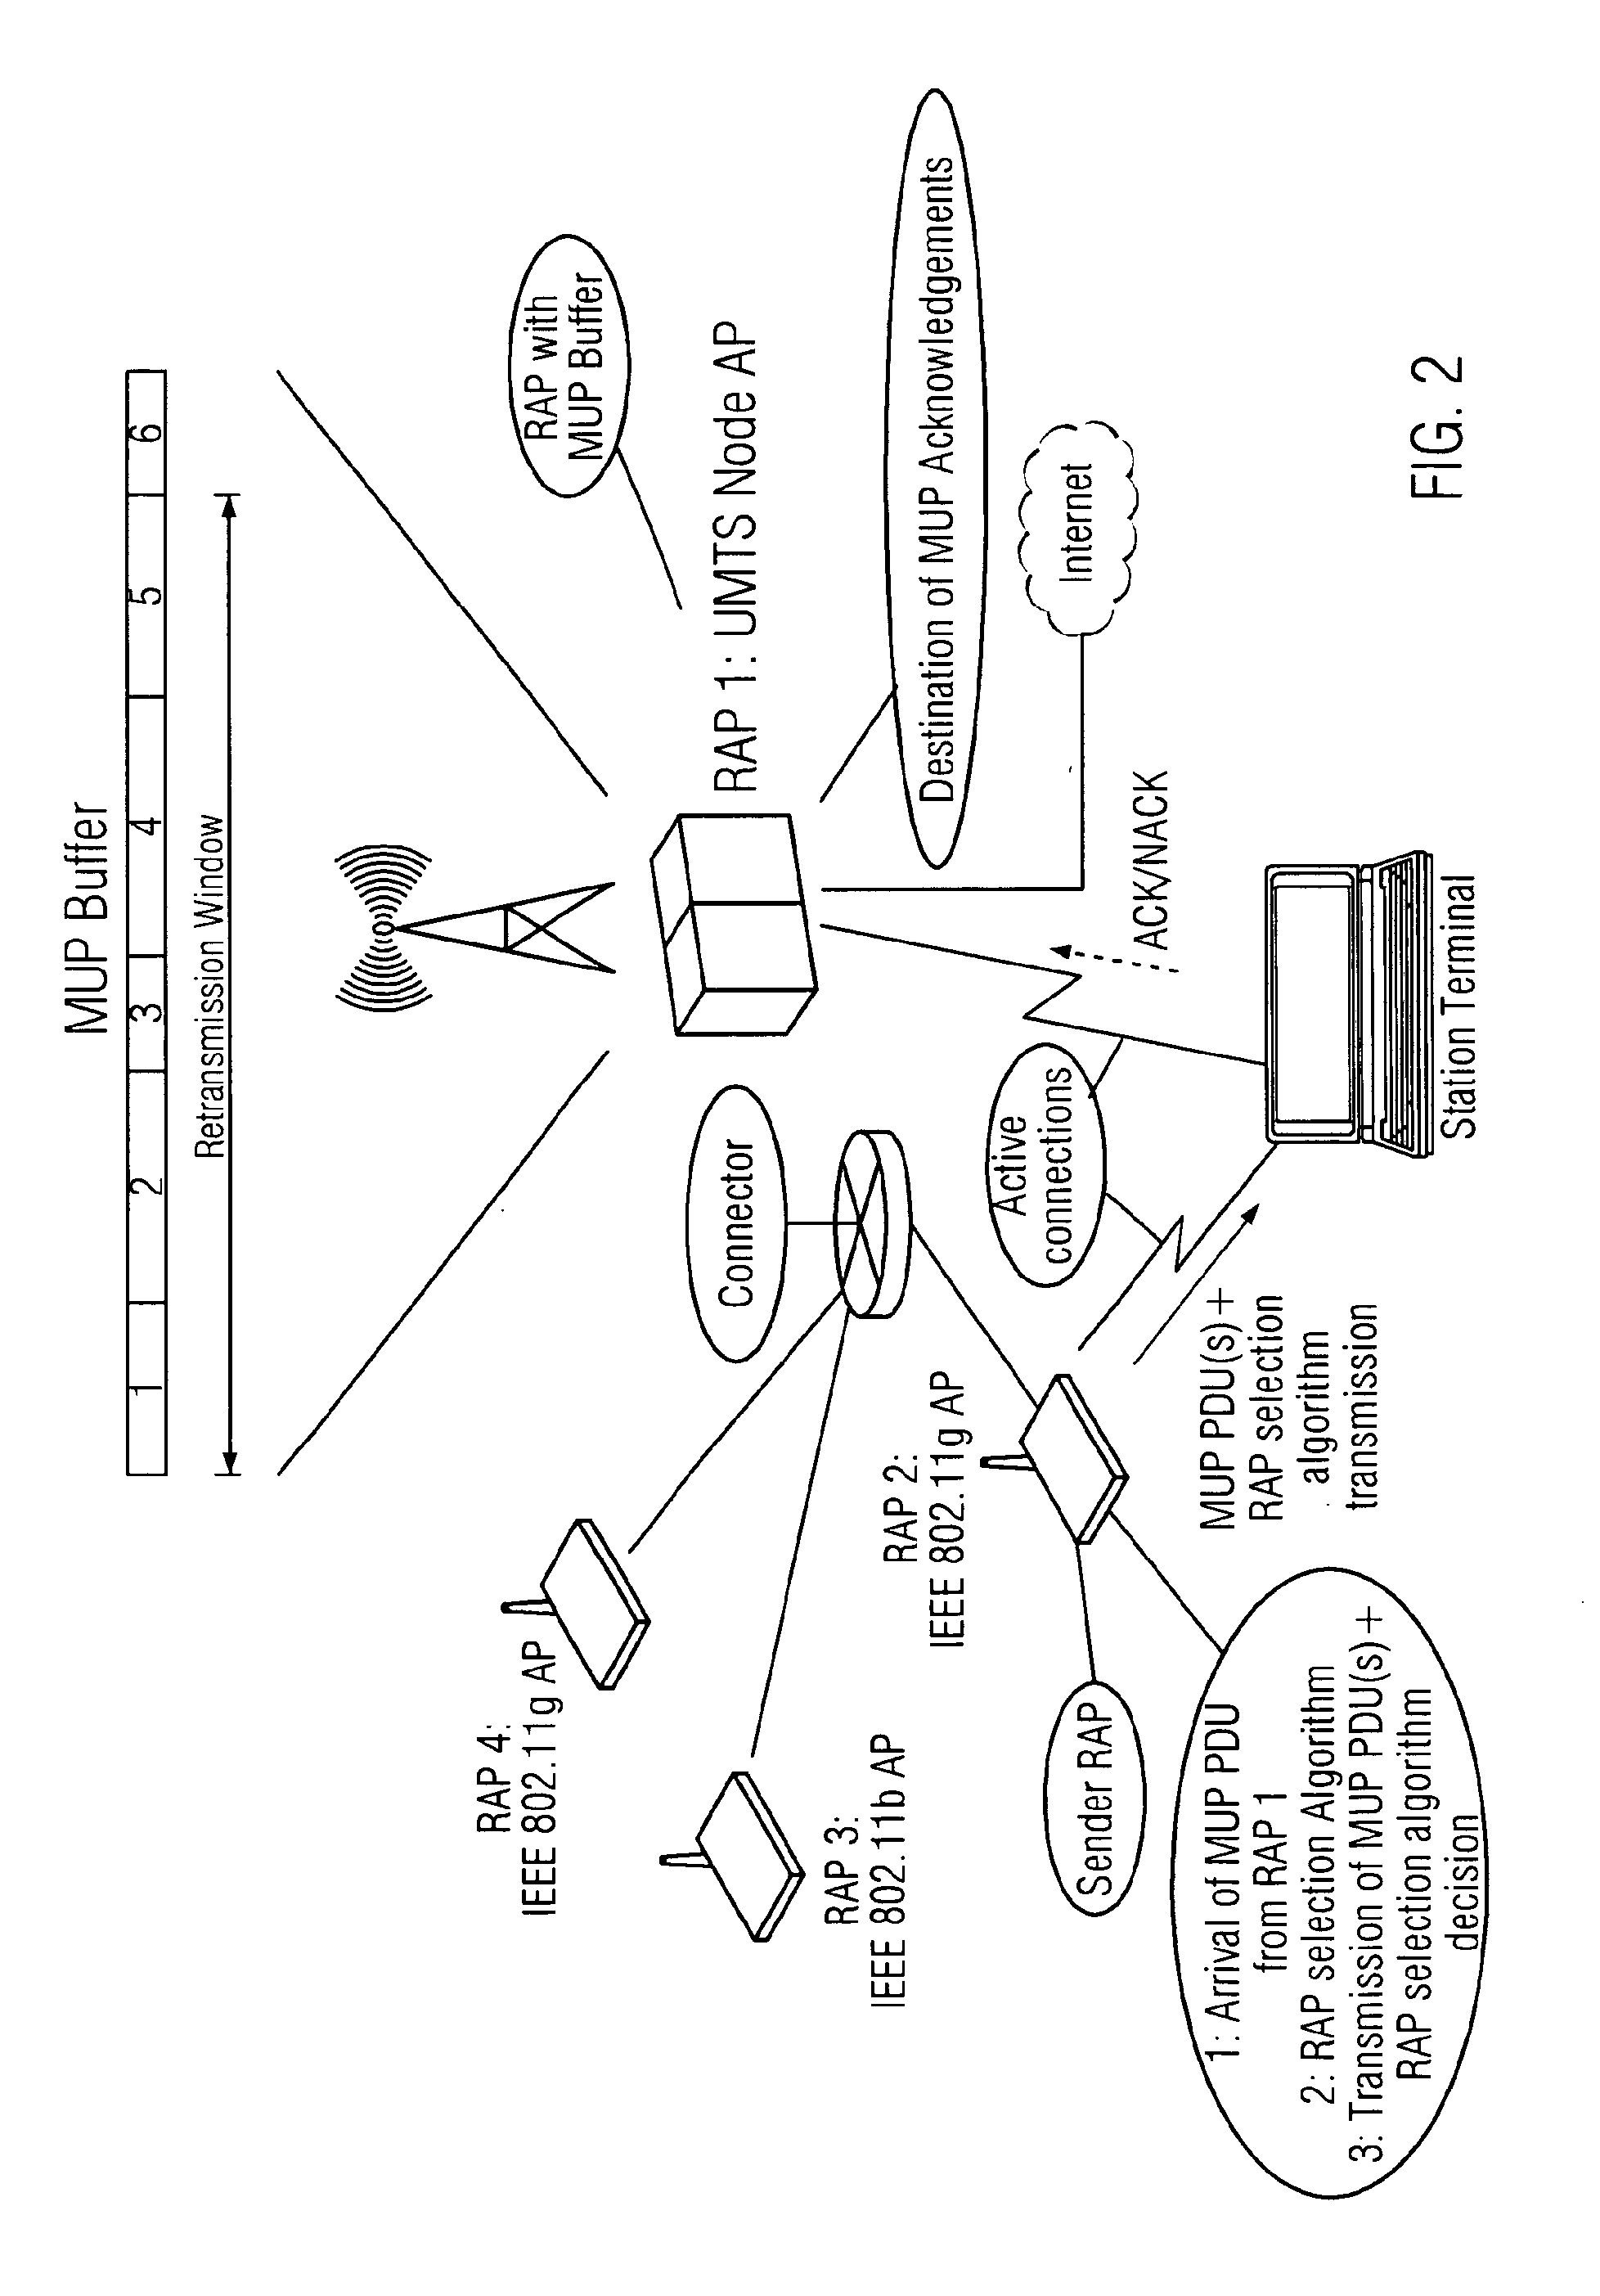 Transmission of data packets in a wireless communication network